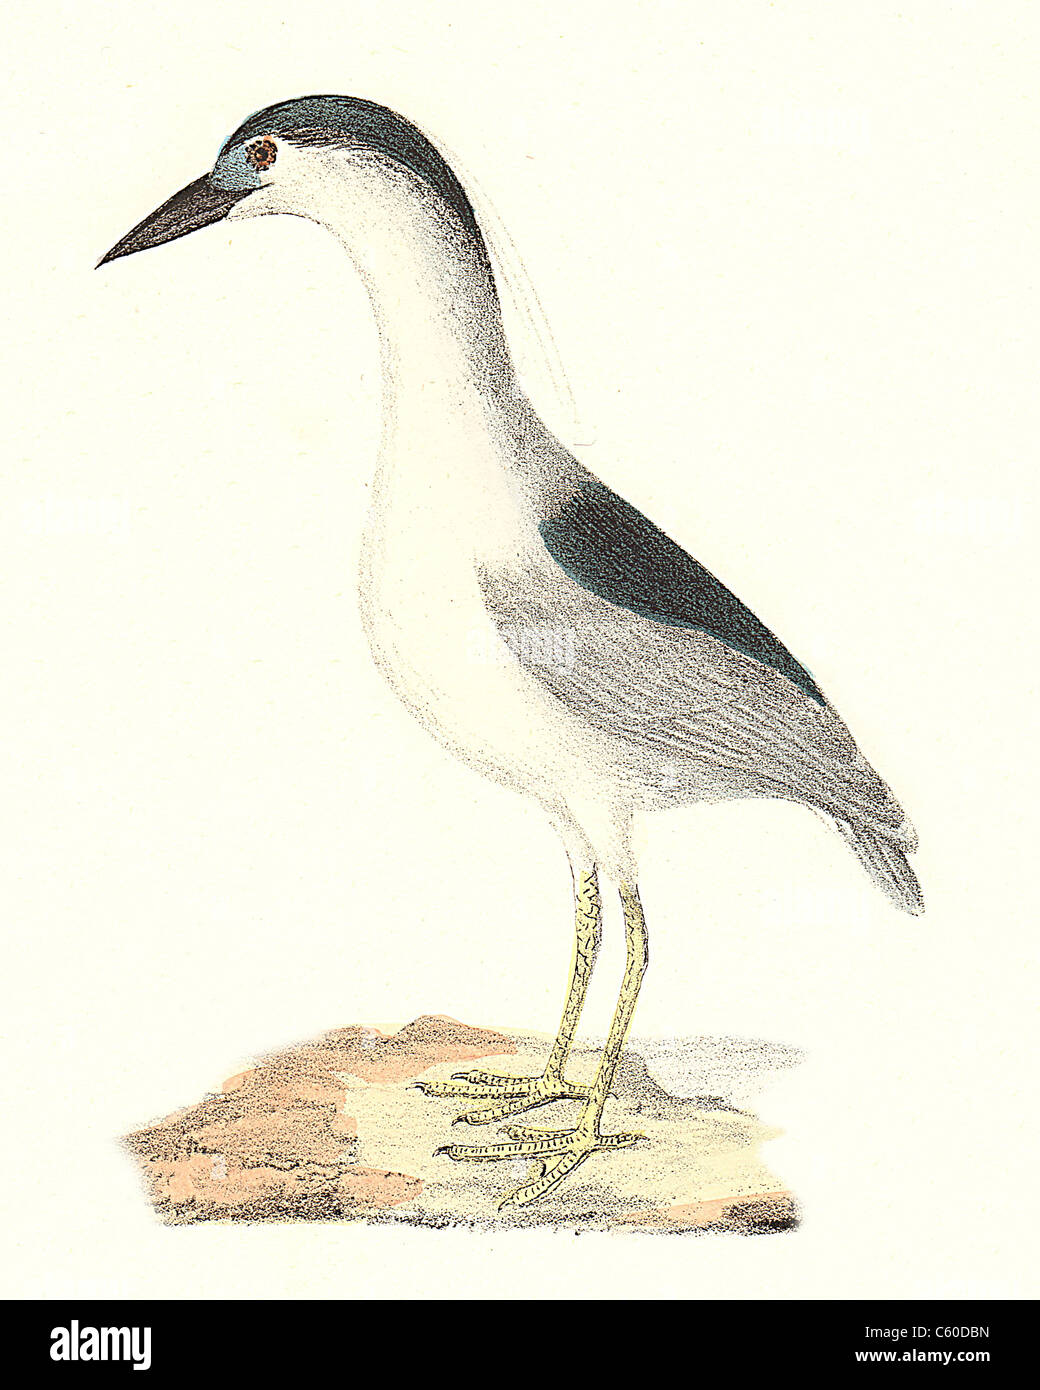 The Black-crowned Heron, Black-crowned Night Heron (Ardea discors, Nycticorax nycticorax) vintage bird lithograph - James De Kay, Zoology of NY, Birds Stock Photo